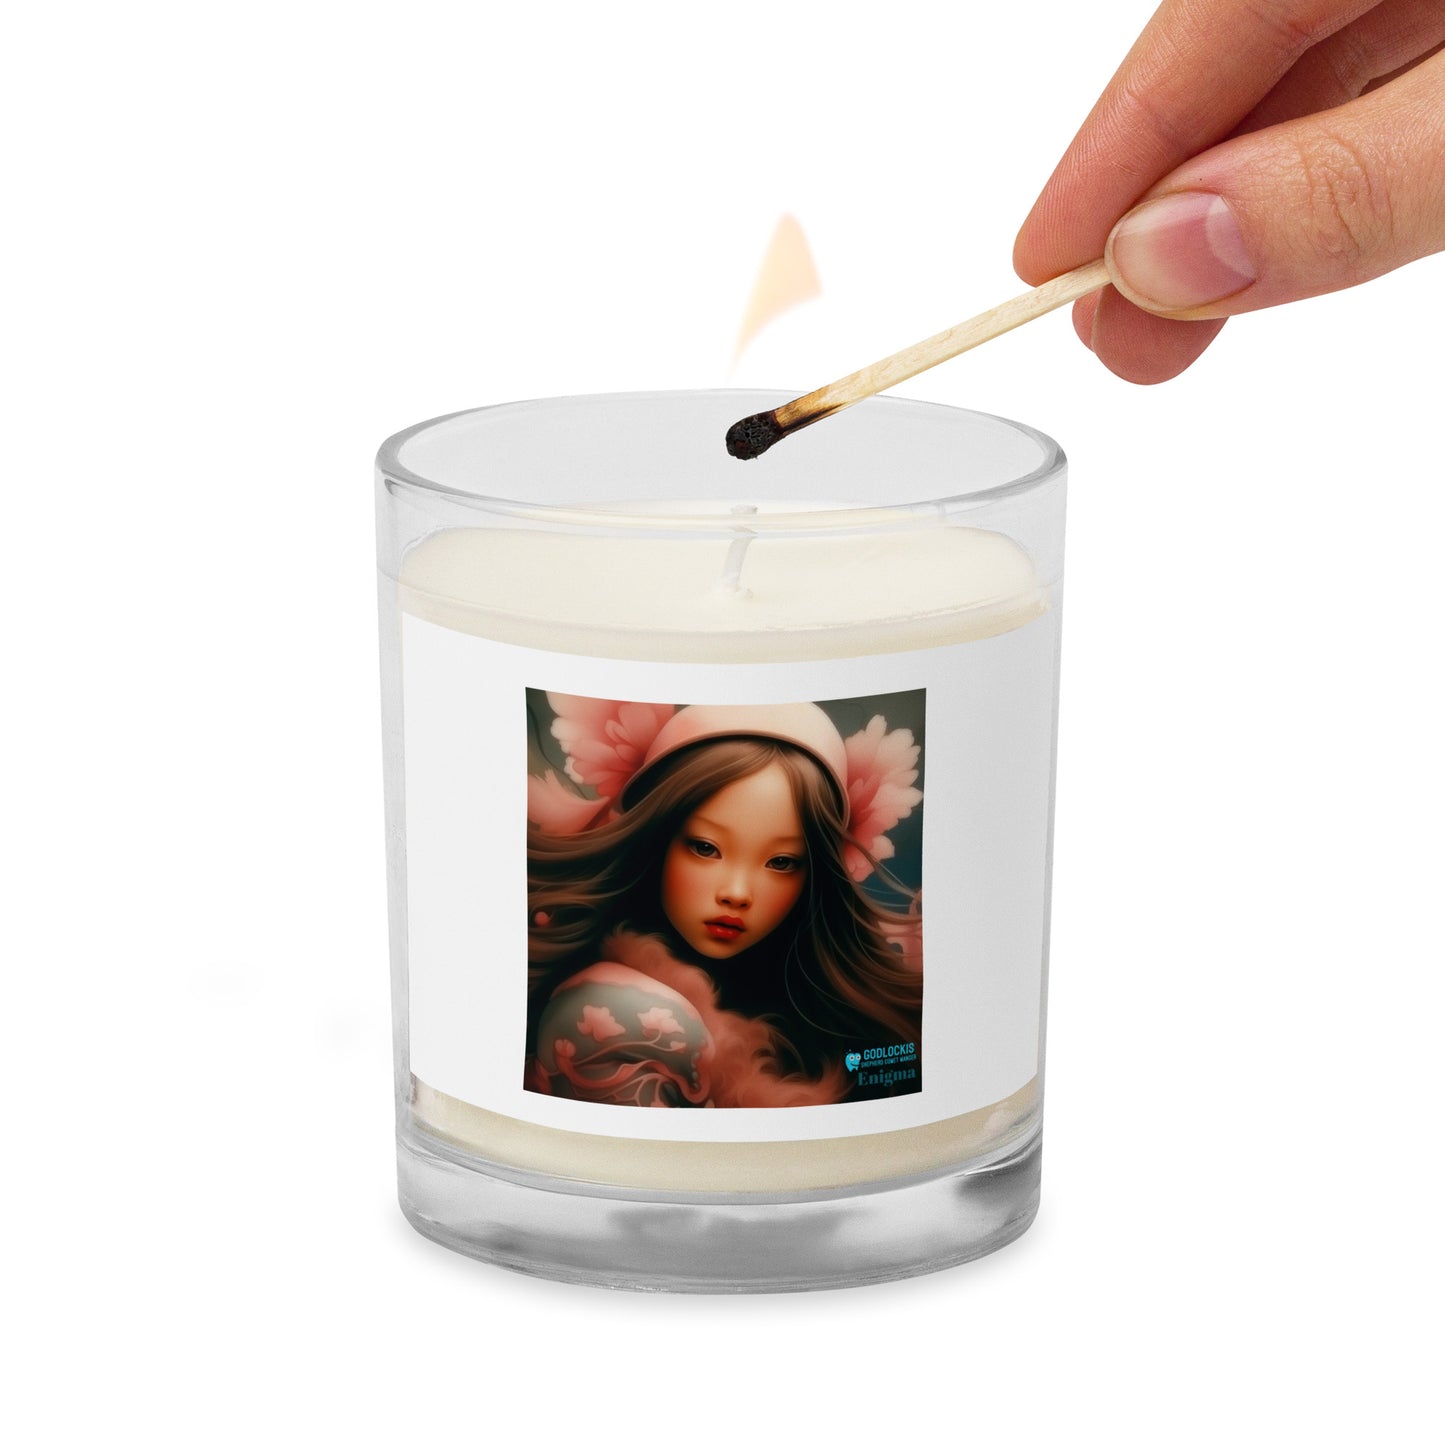 Mama's Message of Strength and Mystery: Enigma - Friendship Candle Gift for Best Friends - Unscented Soy Wax Candle